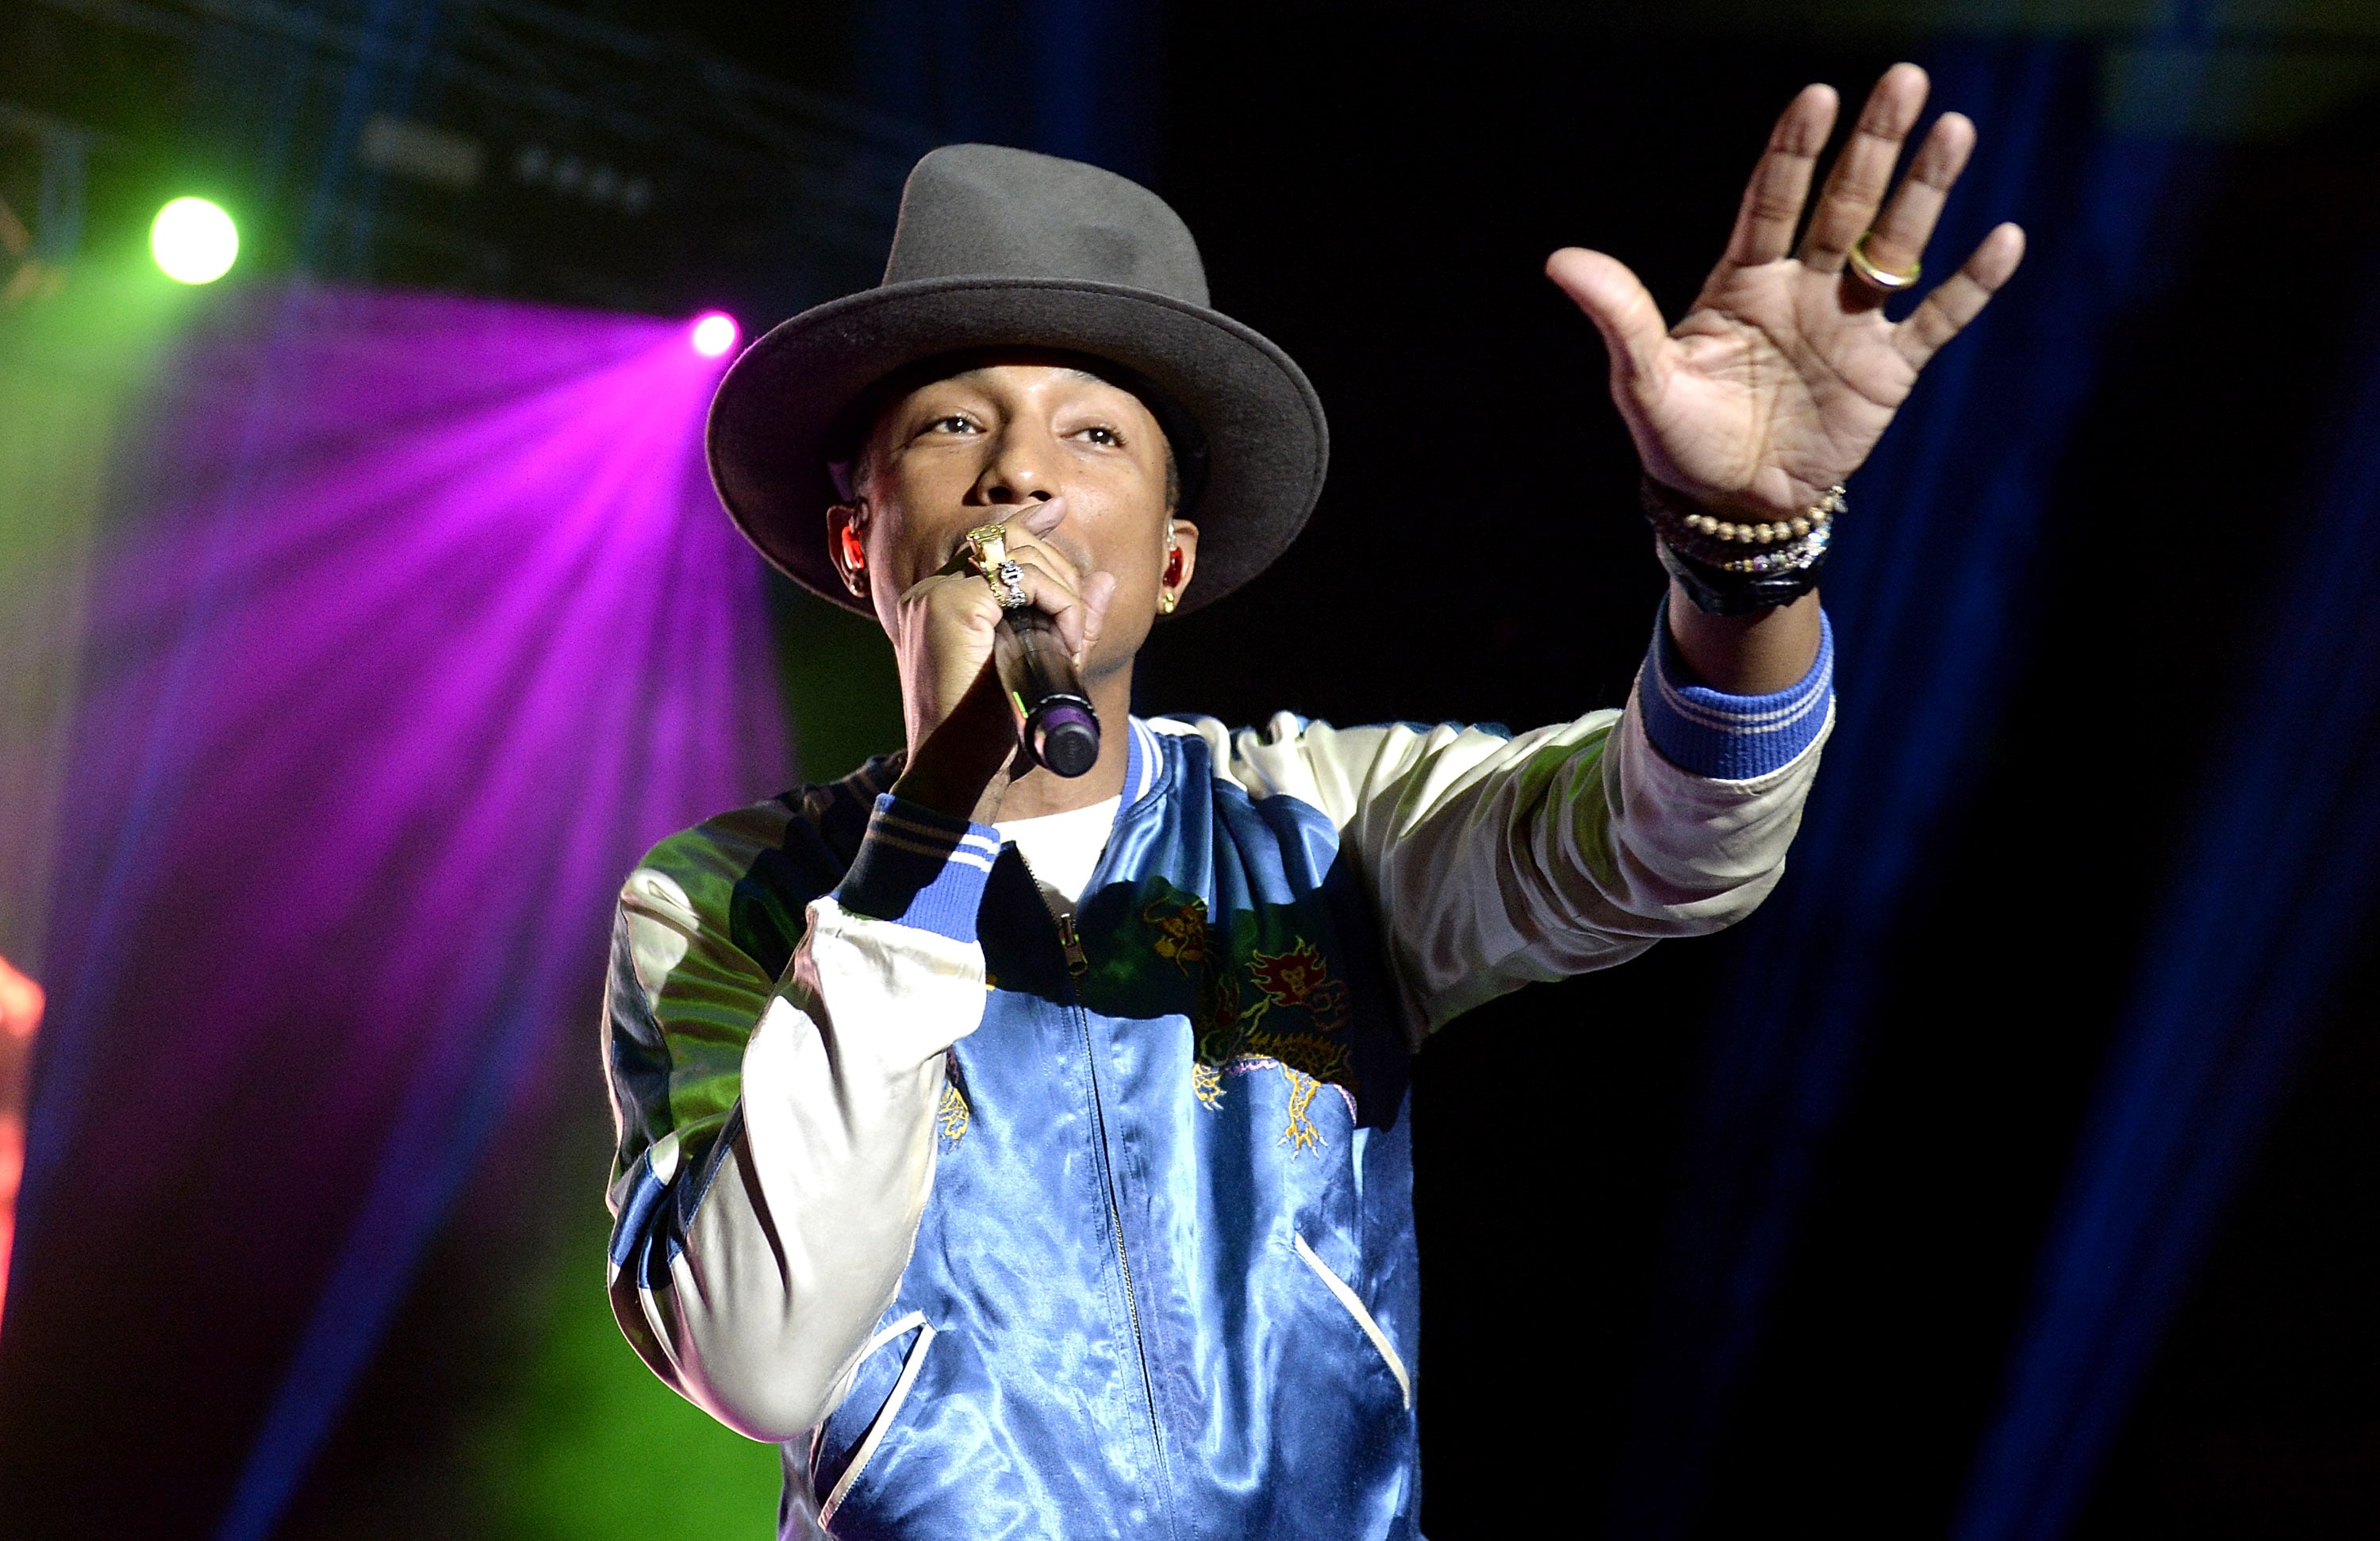 Pharrell Williams: 10 Songs You Didn't Know He Wrote or Produced